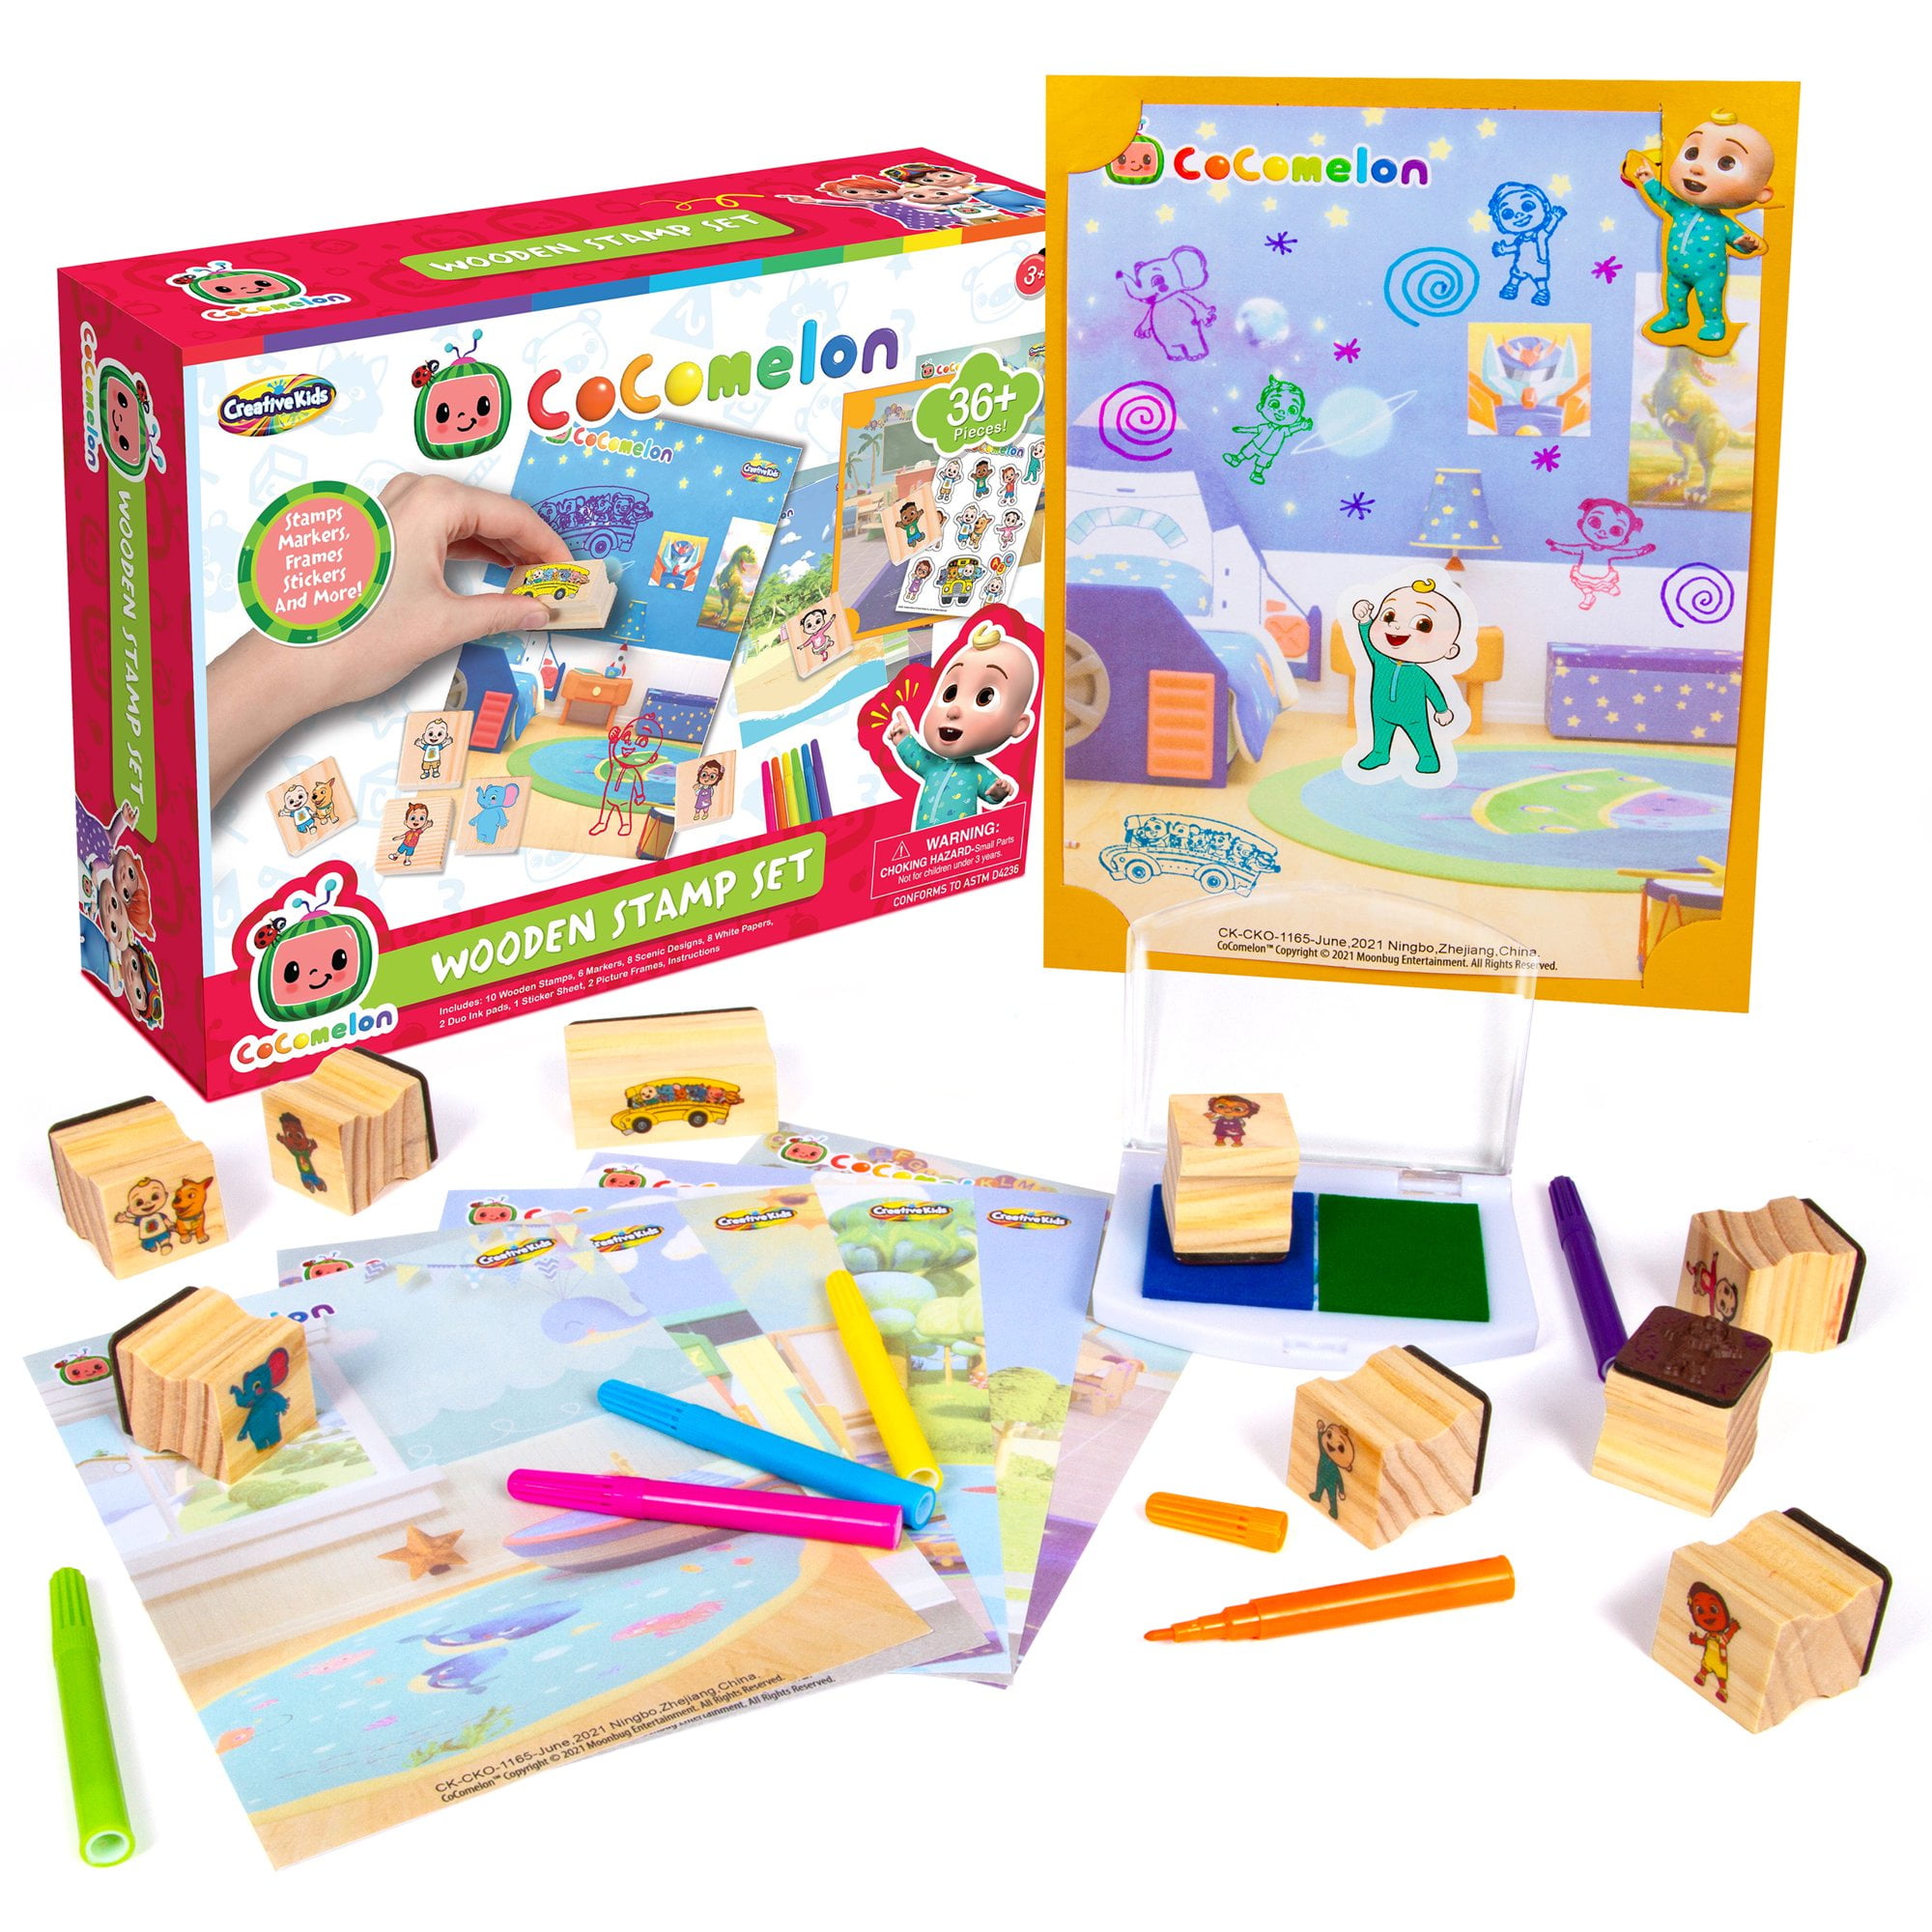 Cocomelon Stamp Set by Creative Kids - 36+ pcs Wooden Stamps Set -  Montessori Birthday Gift for Girls Boys Toddlers Ages 3+